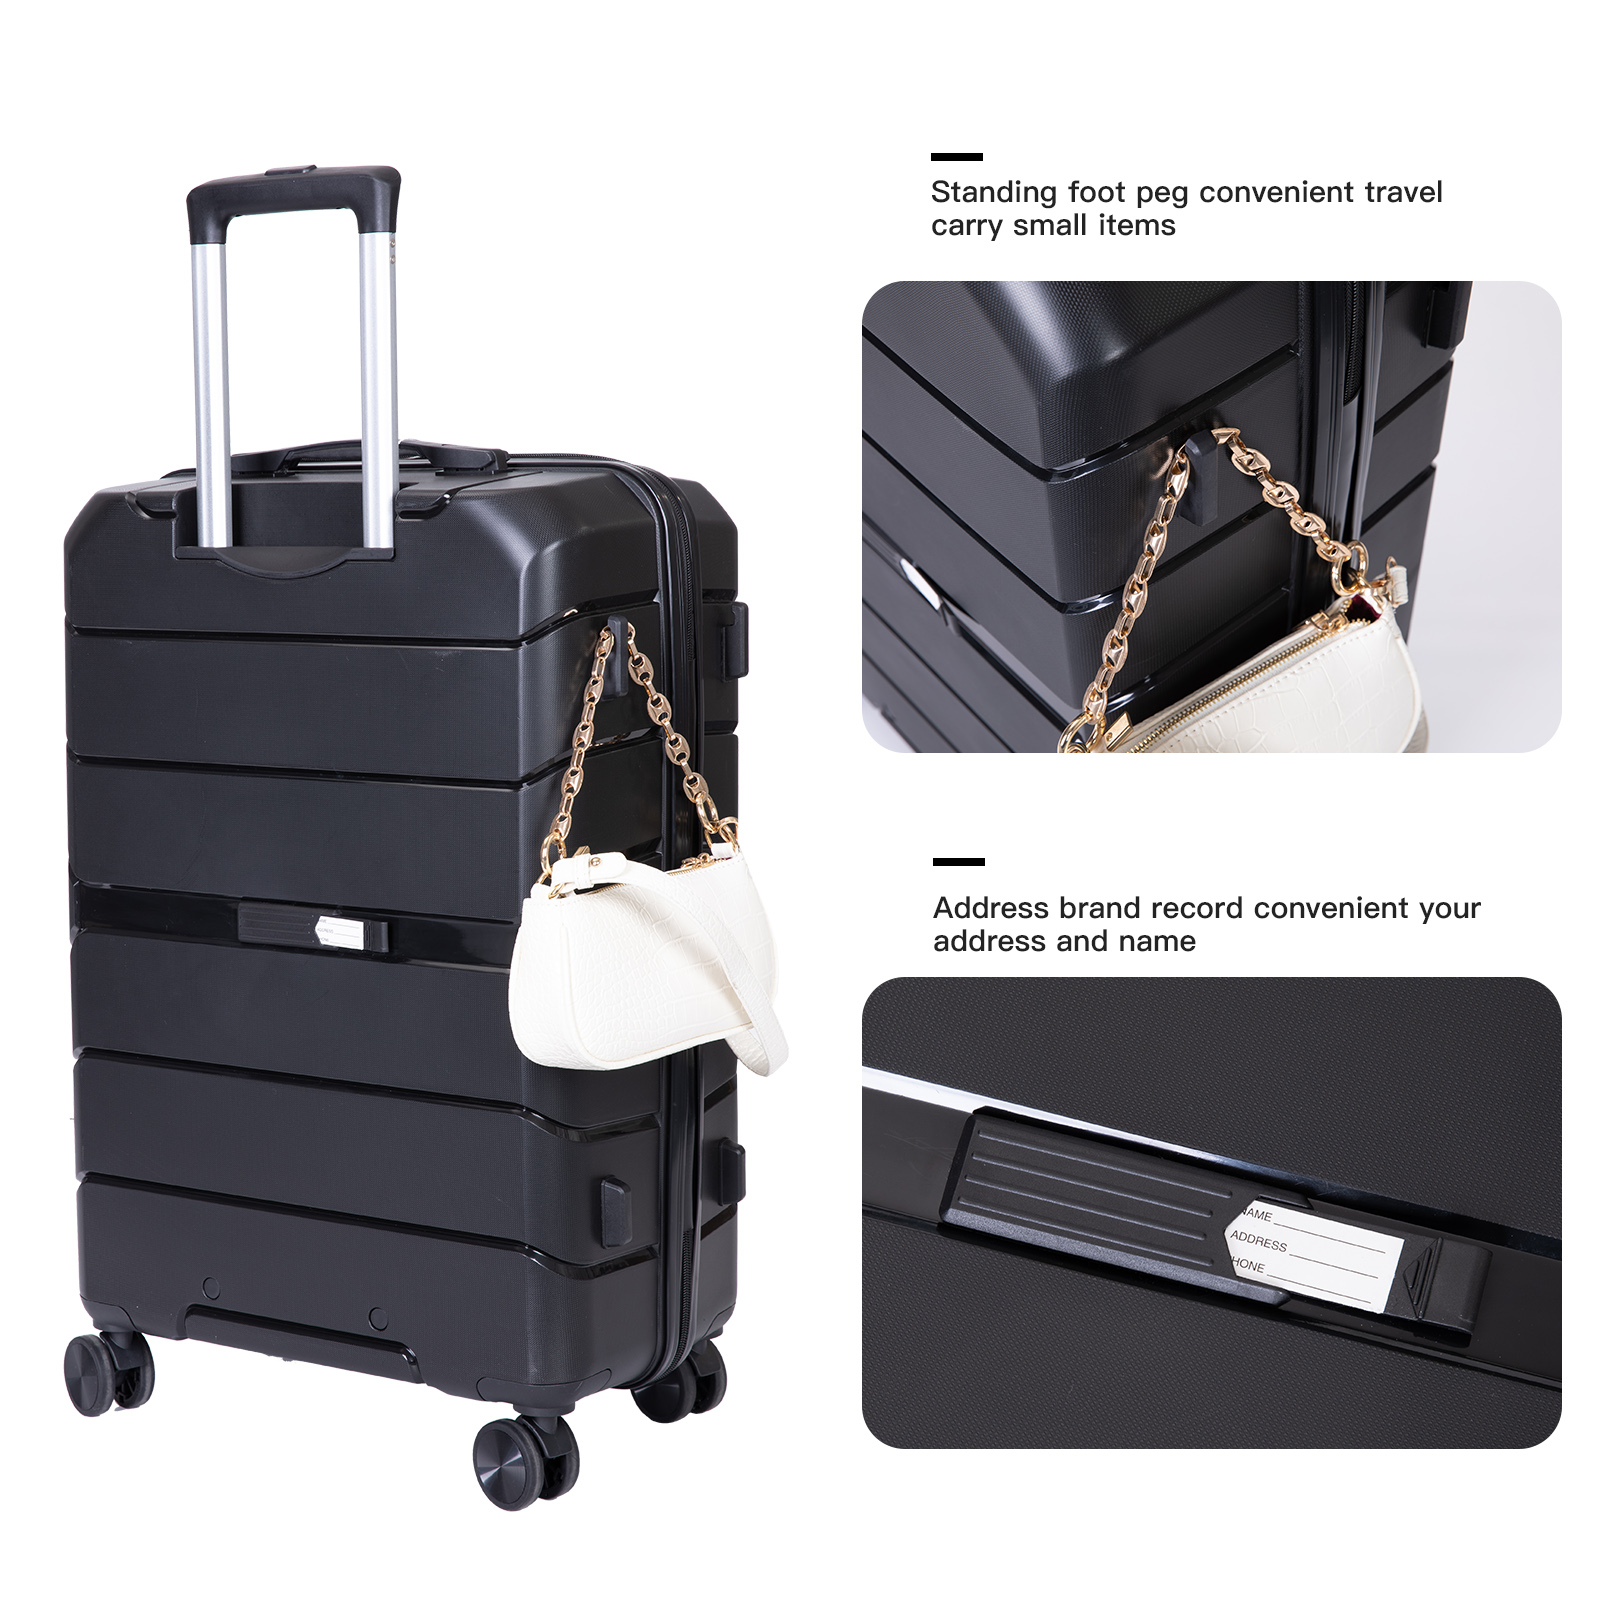 Travelhouse 3 Piece Luggage Set Hardshell Lightweight Suitcase with TSA Lock Spinner Wheels 20in24in28in.(Black) - image 3 of 8